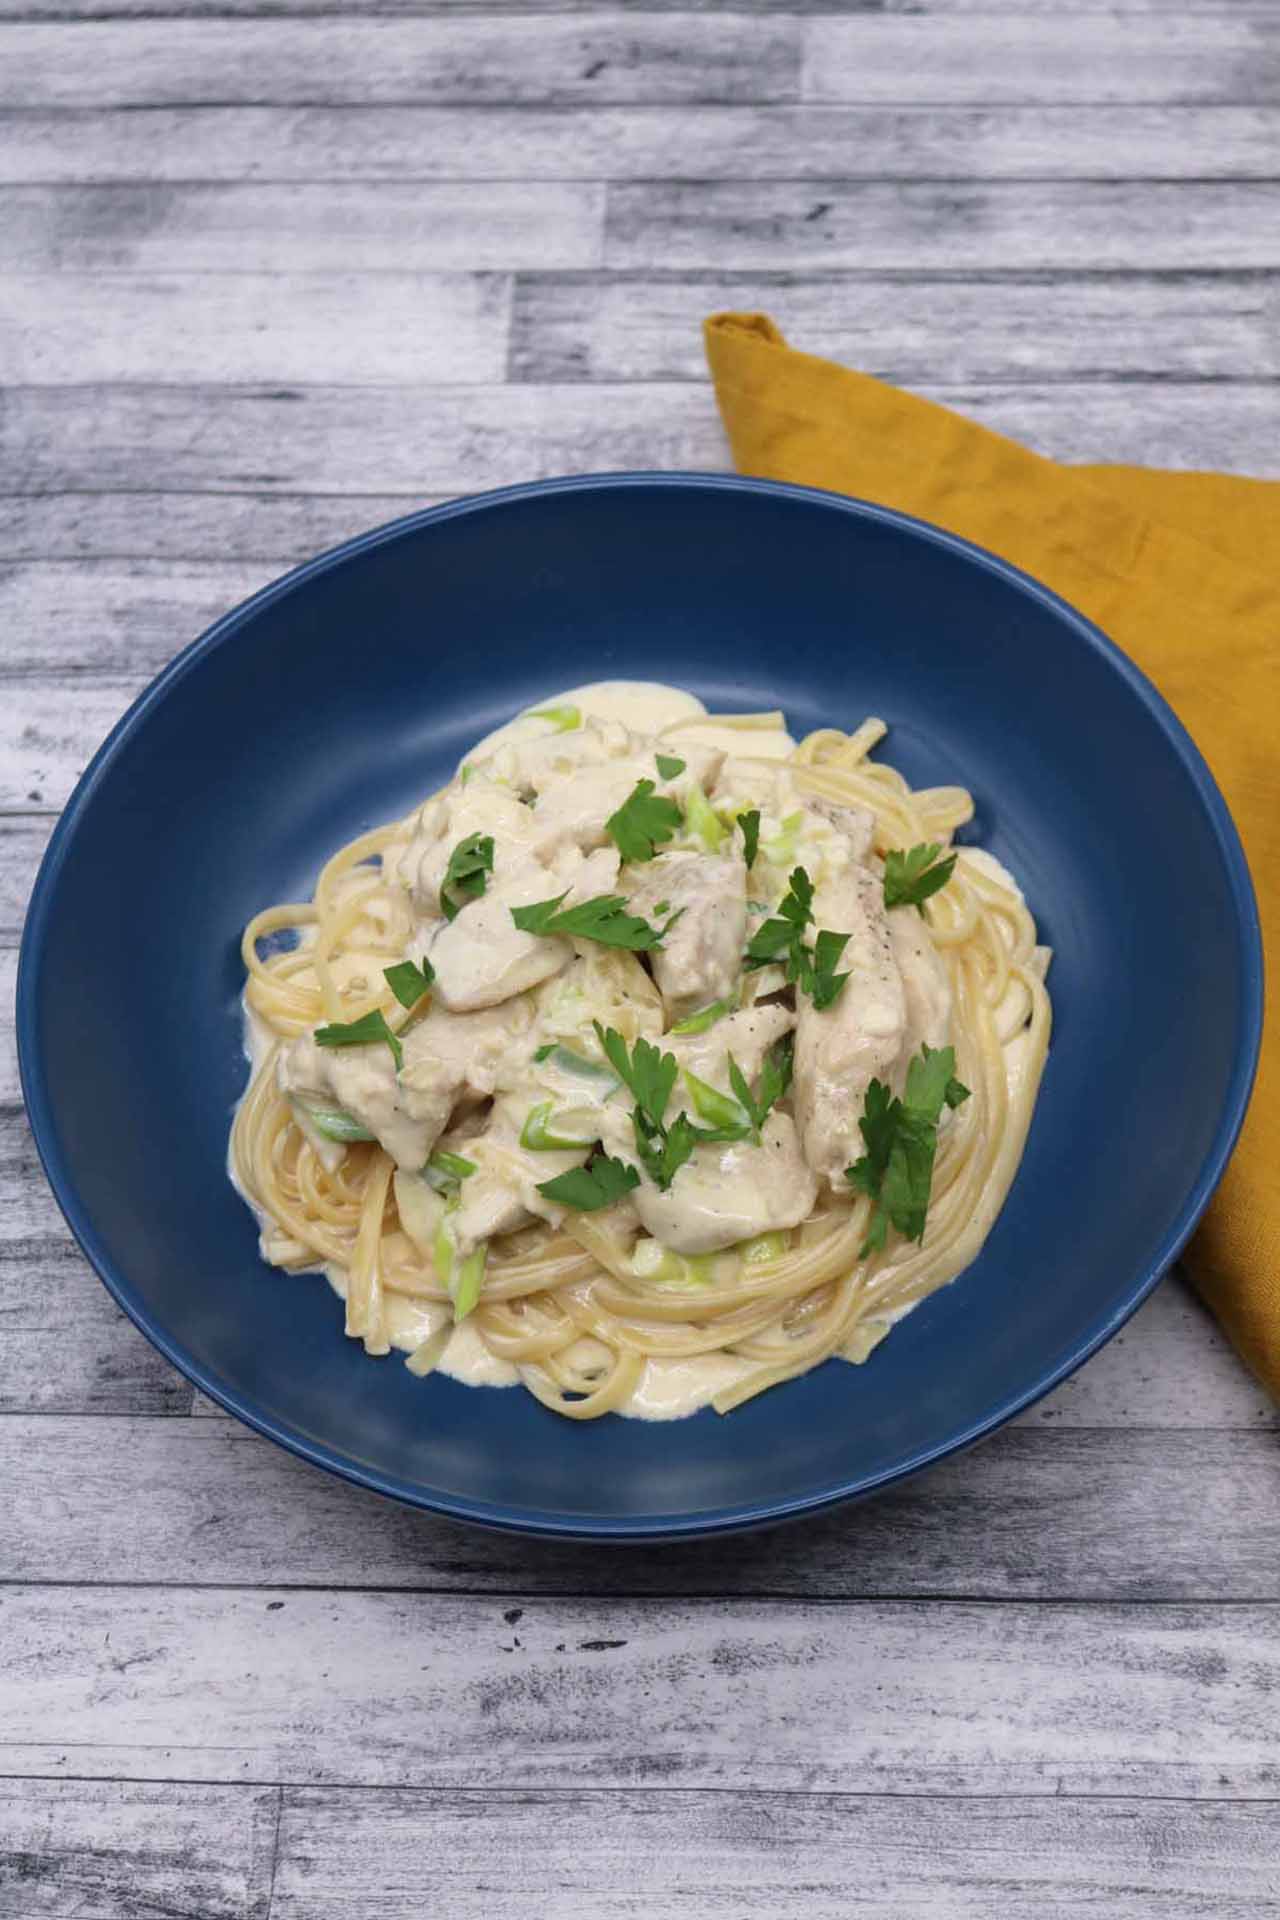 Linguine with Chicken in an Onion Cream Sauce